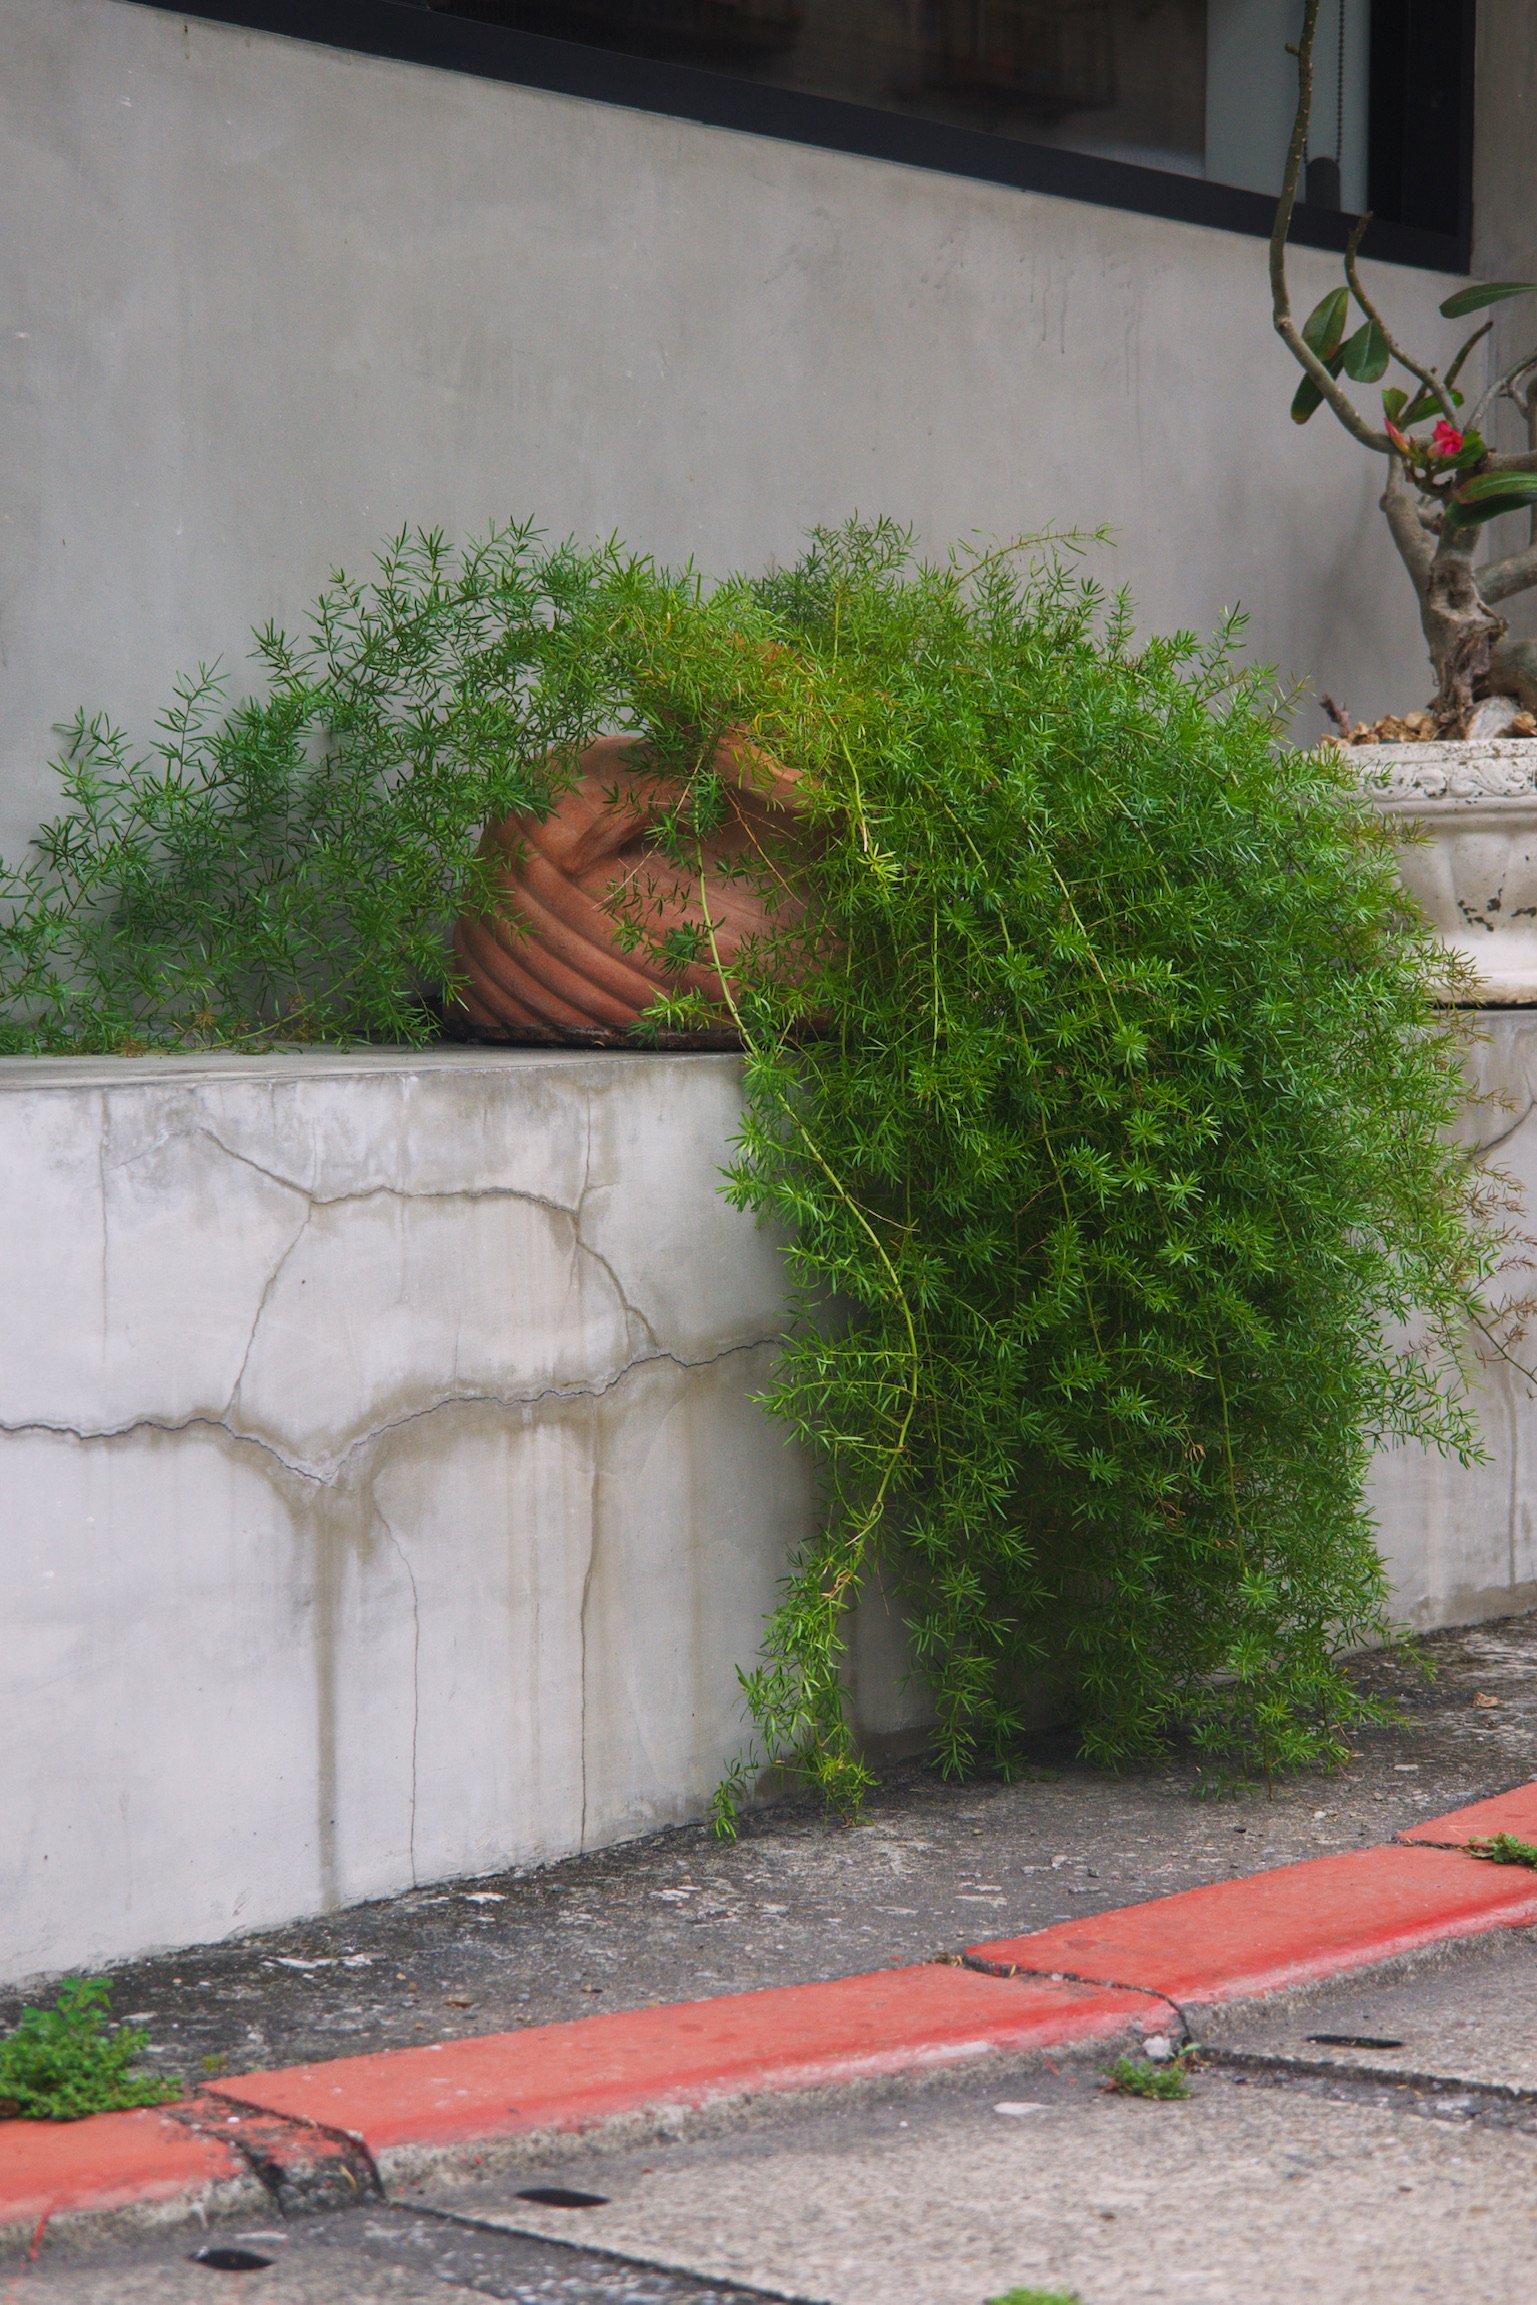 A leaning pot of lush plant along the sidewalk.